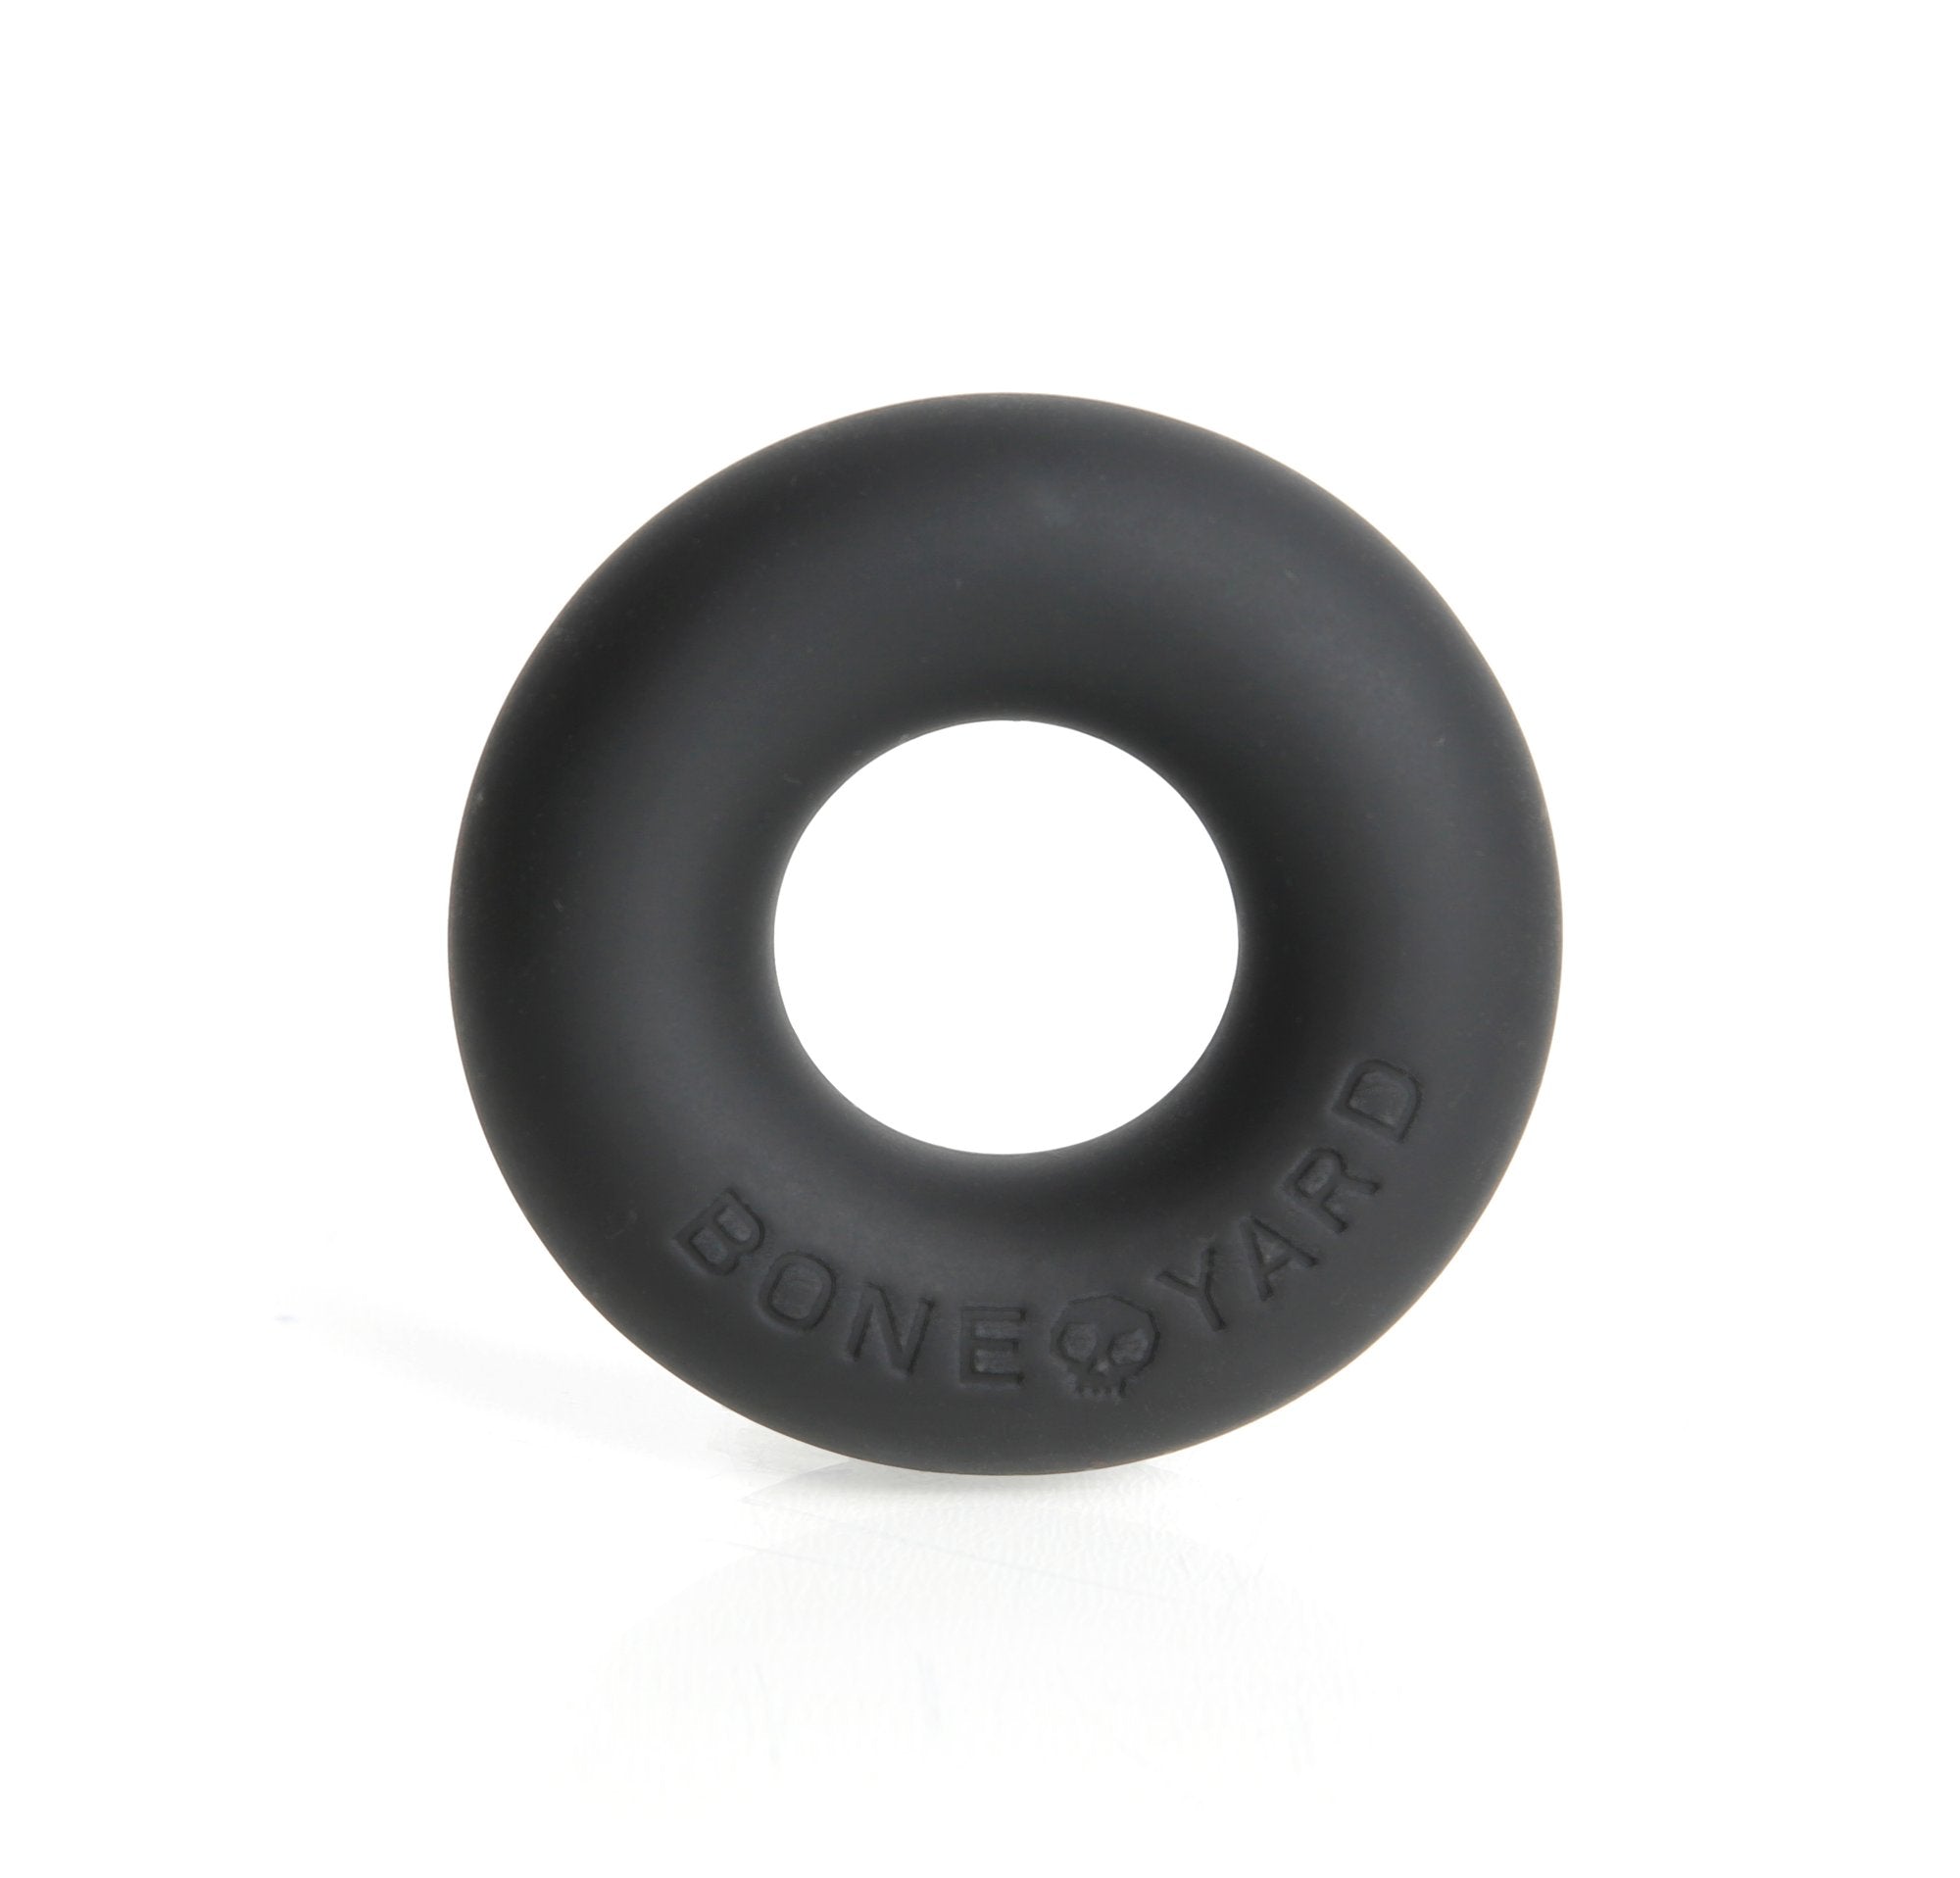 ULTIMATE SILICONE RING - BLACK